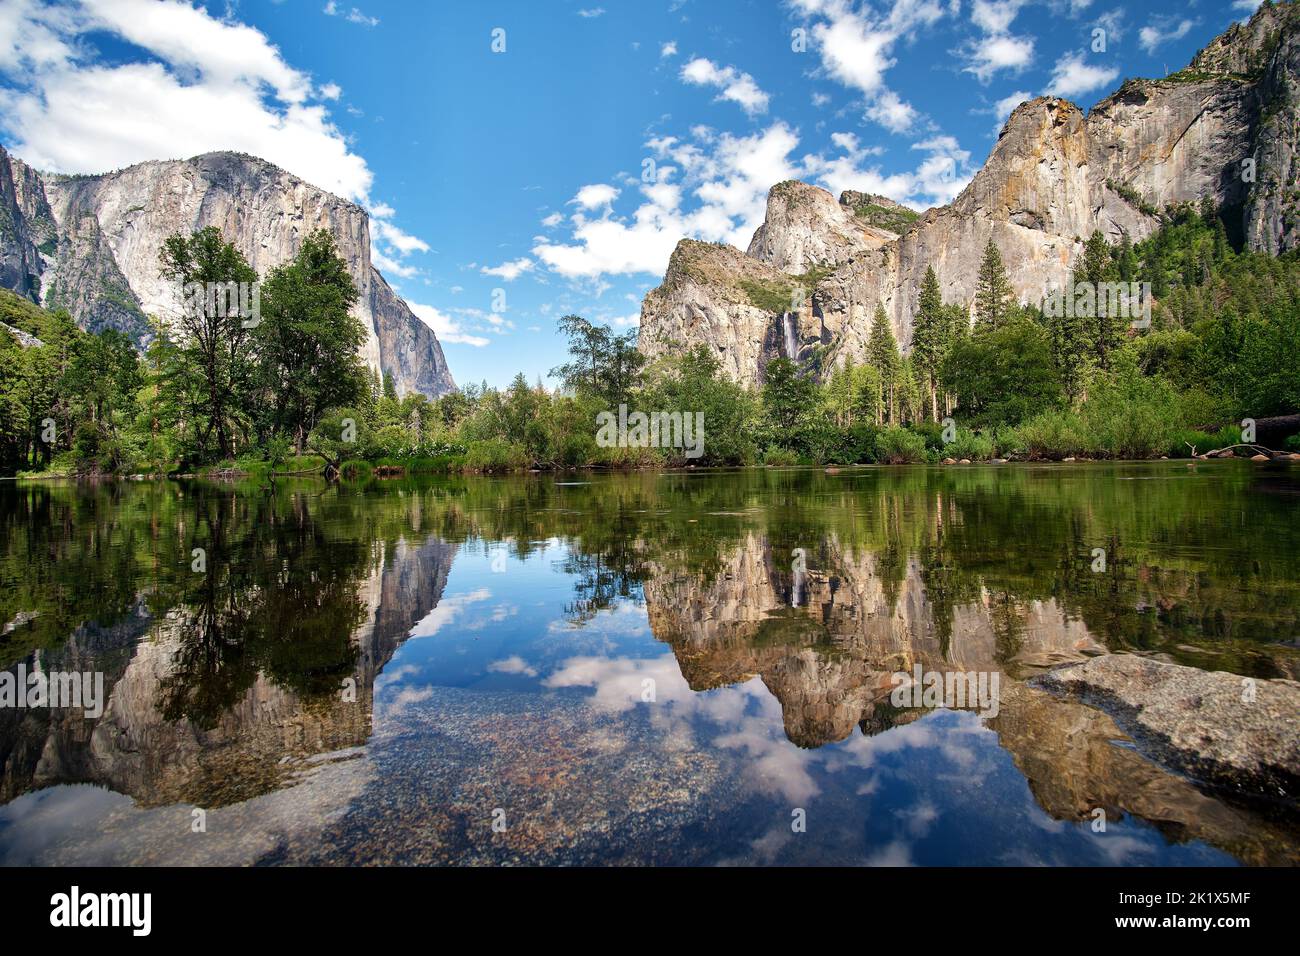 A beautiful view of Yosemite Valley with El Capitan, Sentinel Rock, Cathedral Rocks, and Bridalveil Fall, California, USA Stock Photo